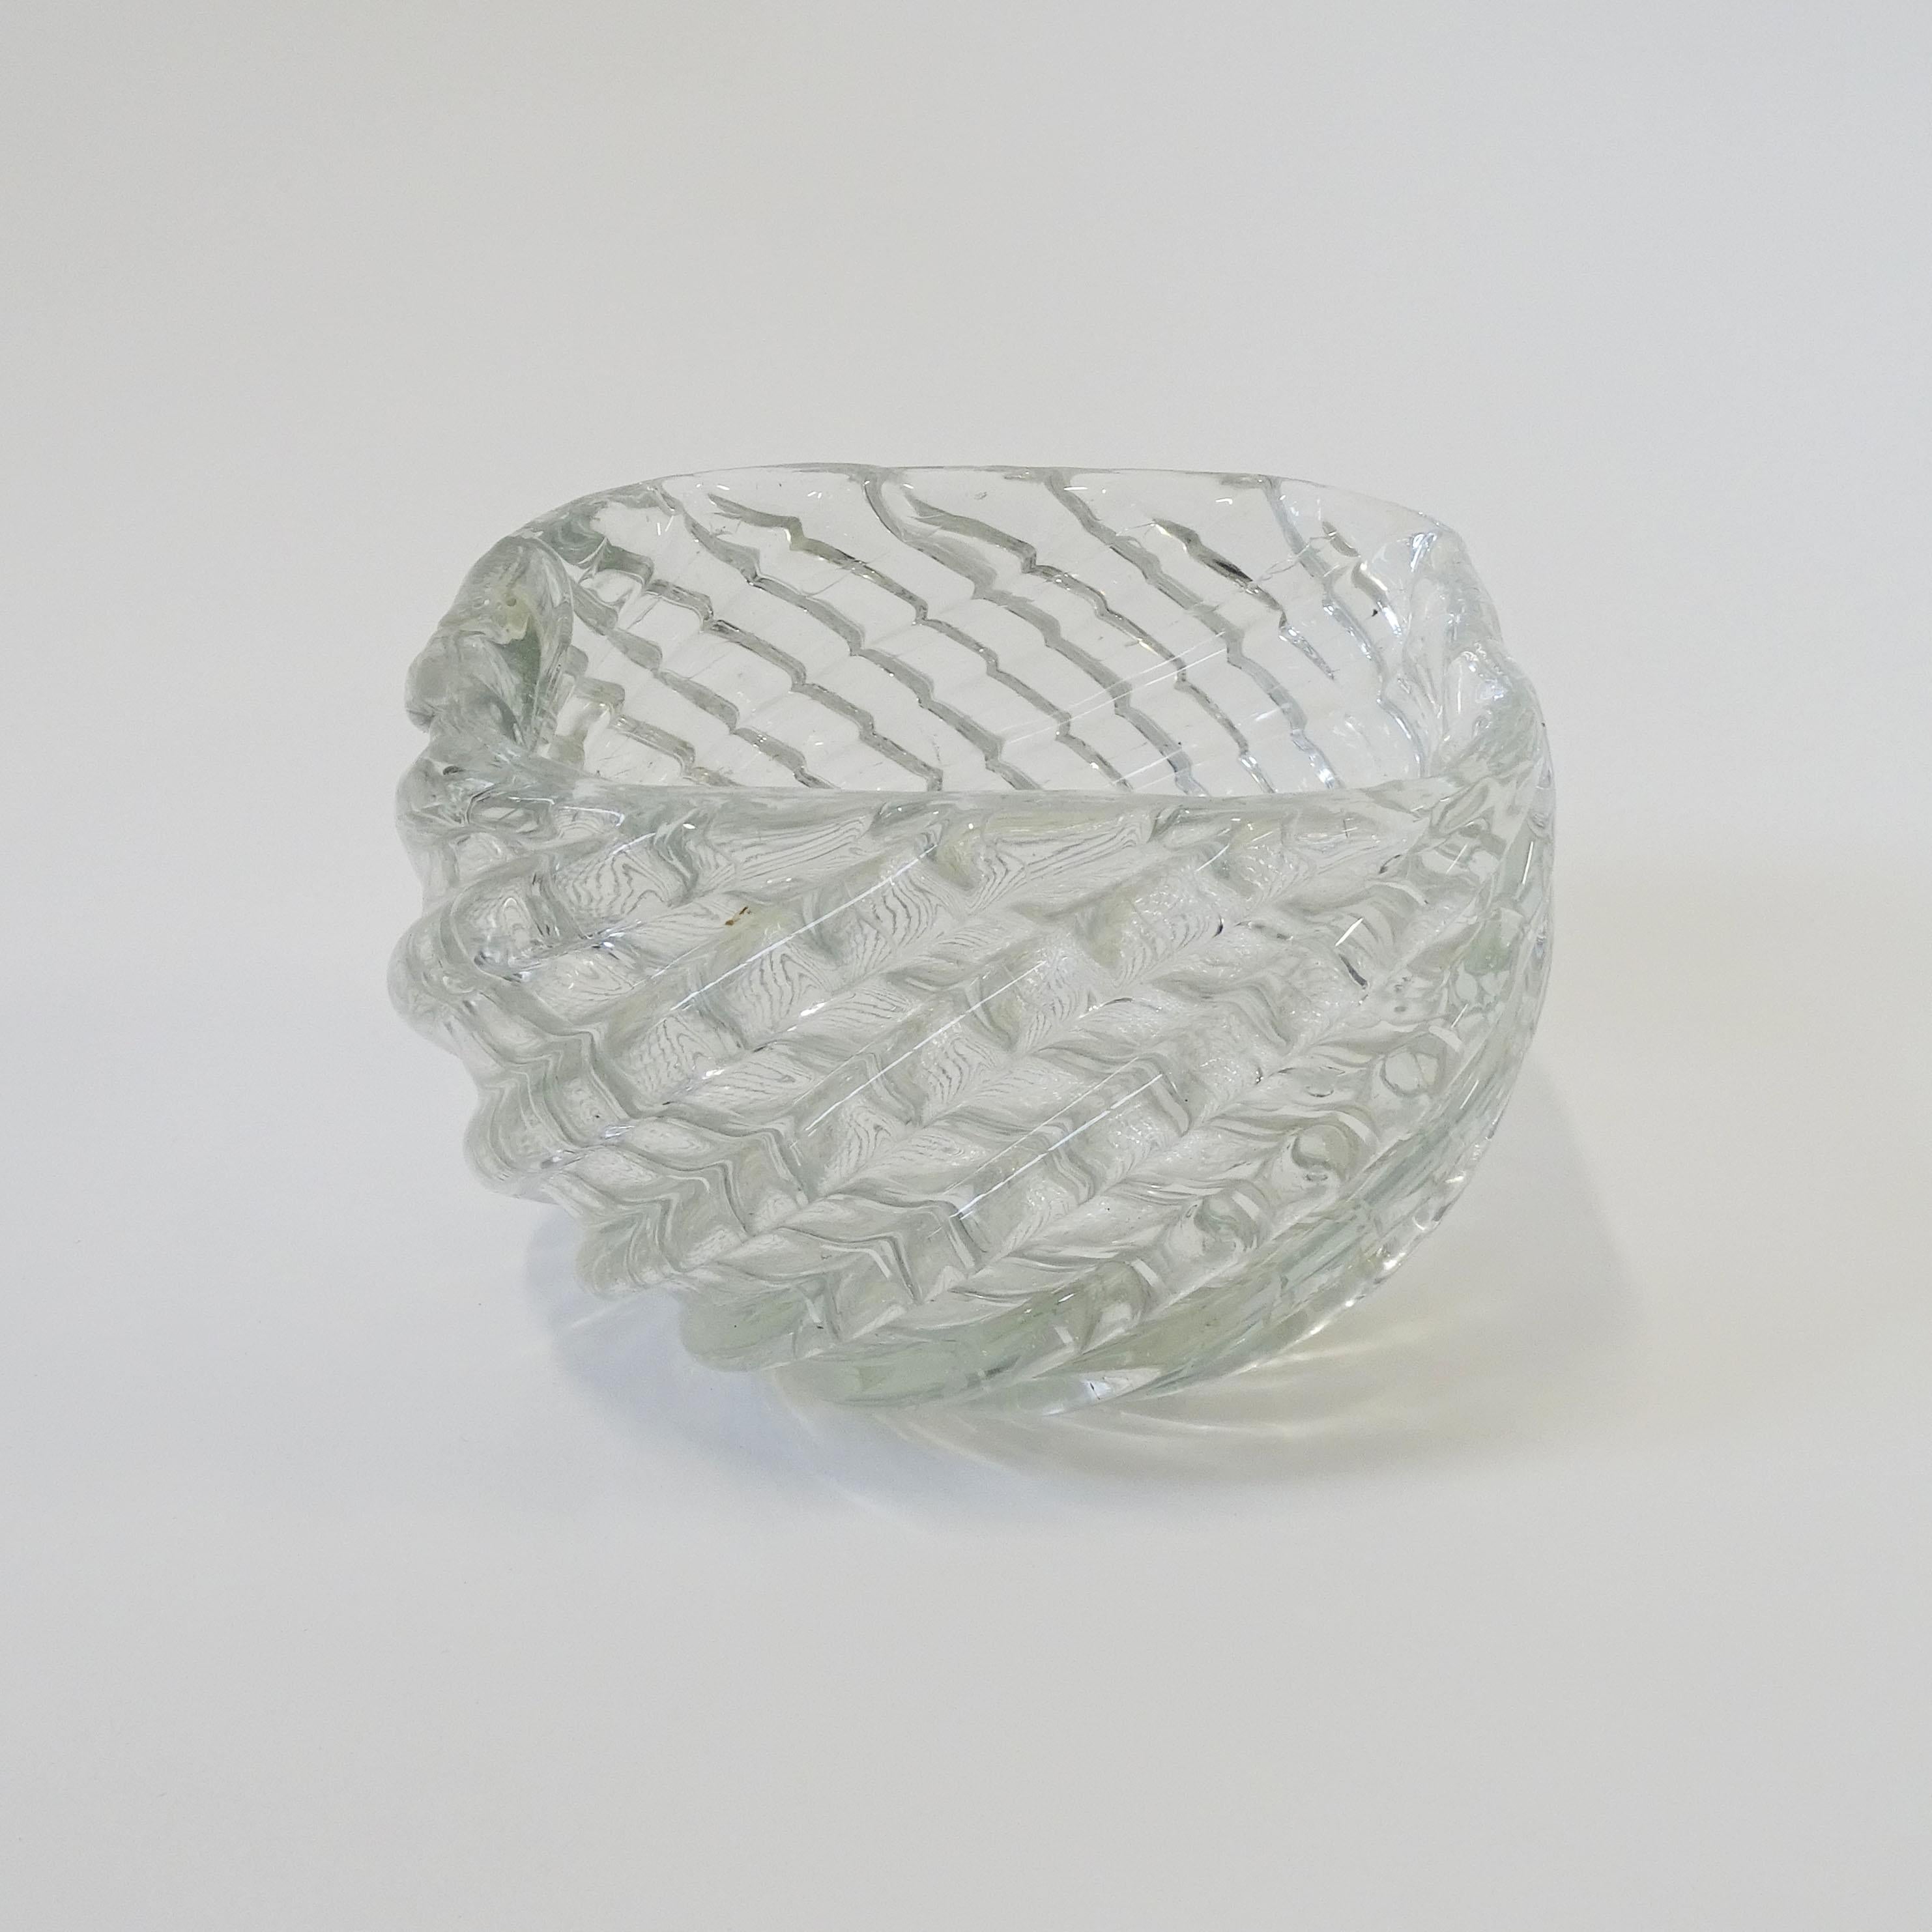 Mid-20th Century Diamante Glass Bowl by Venini, Italy 1940s For Sale